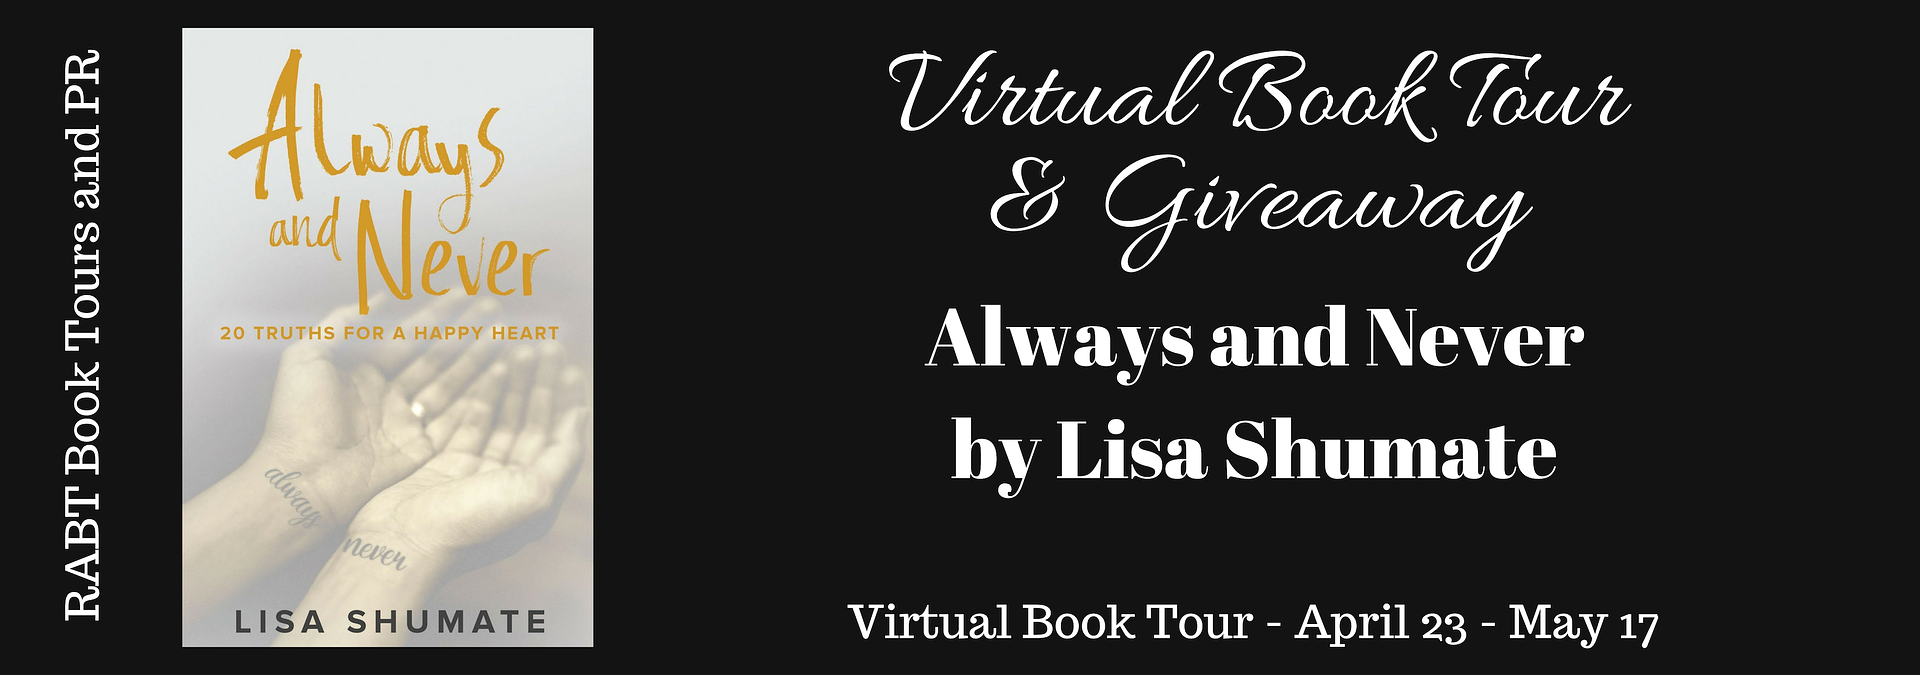 Virtual Book Tour: Always and Never by Lisa Shumate @shumatelisa #interview #giveaway #selfhelp #nonfiction #inspirational @RABTBookTours